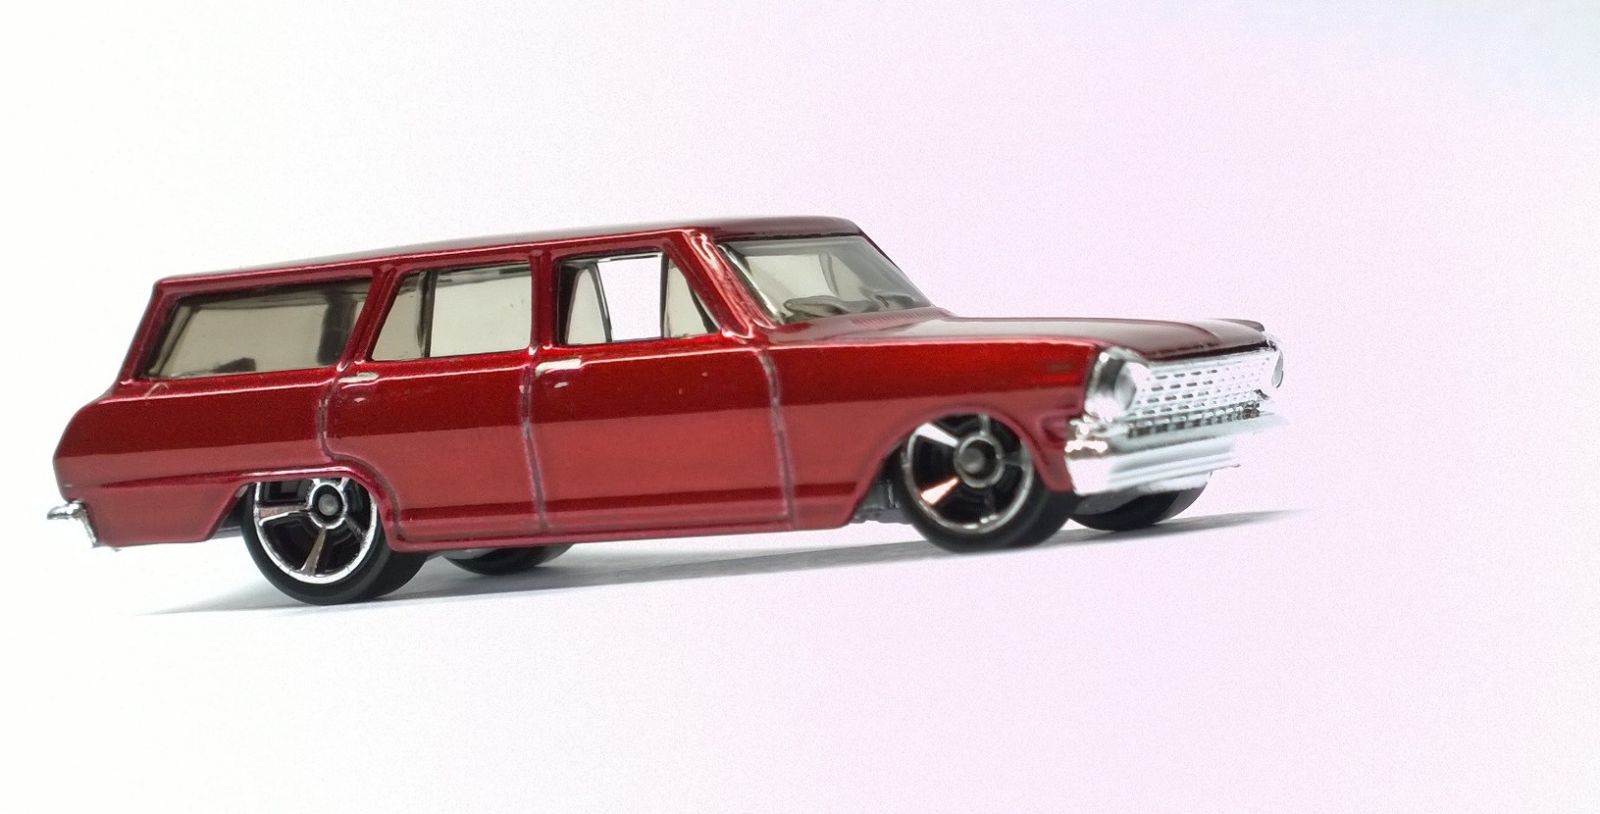 Illustration for article titled CUSTOM 8 Crate and 64 Nova wagon!! Simple mods